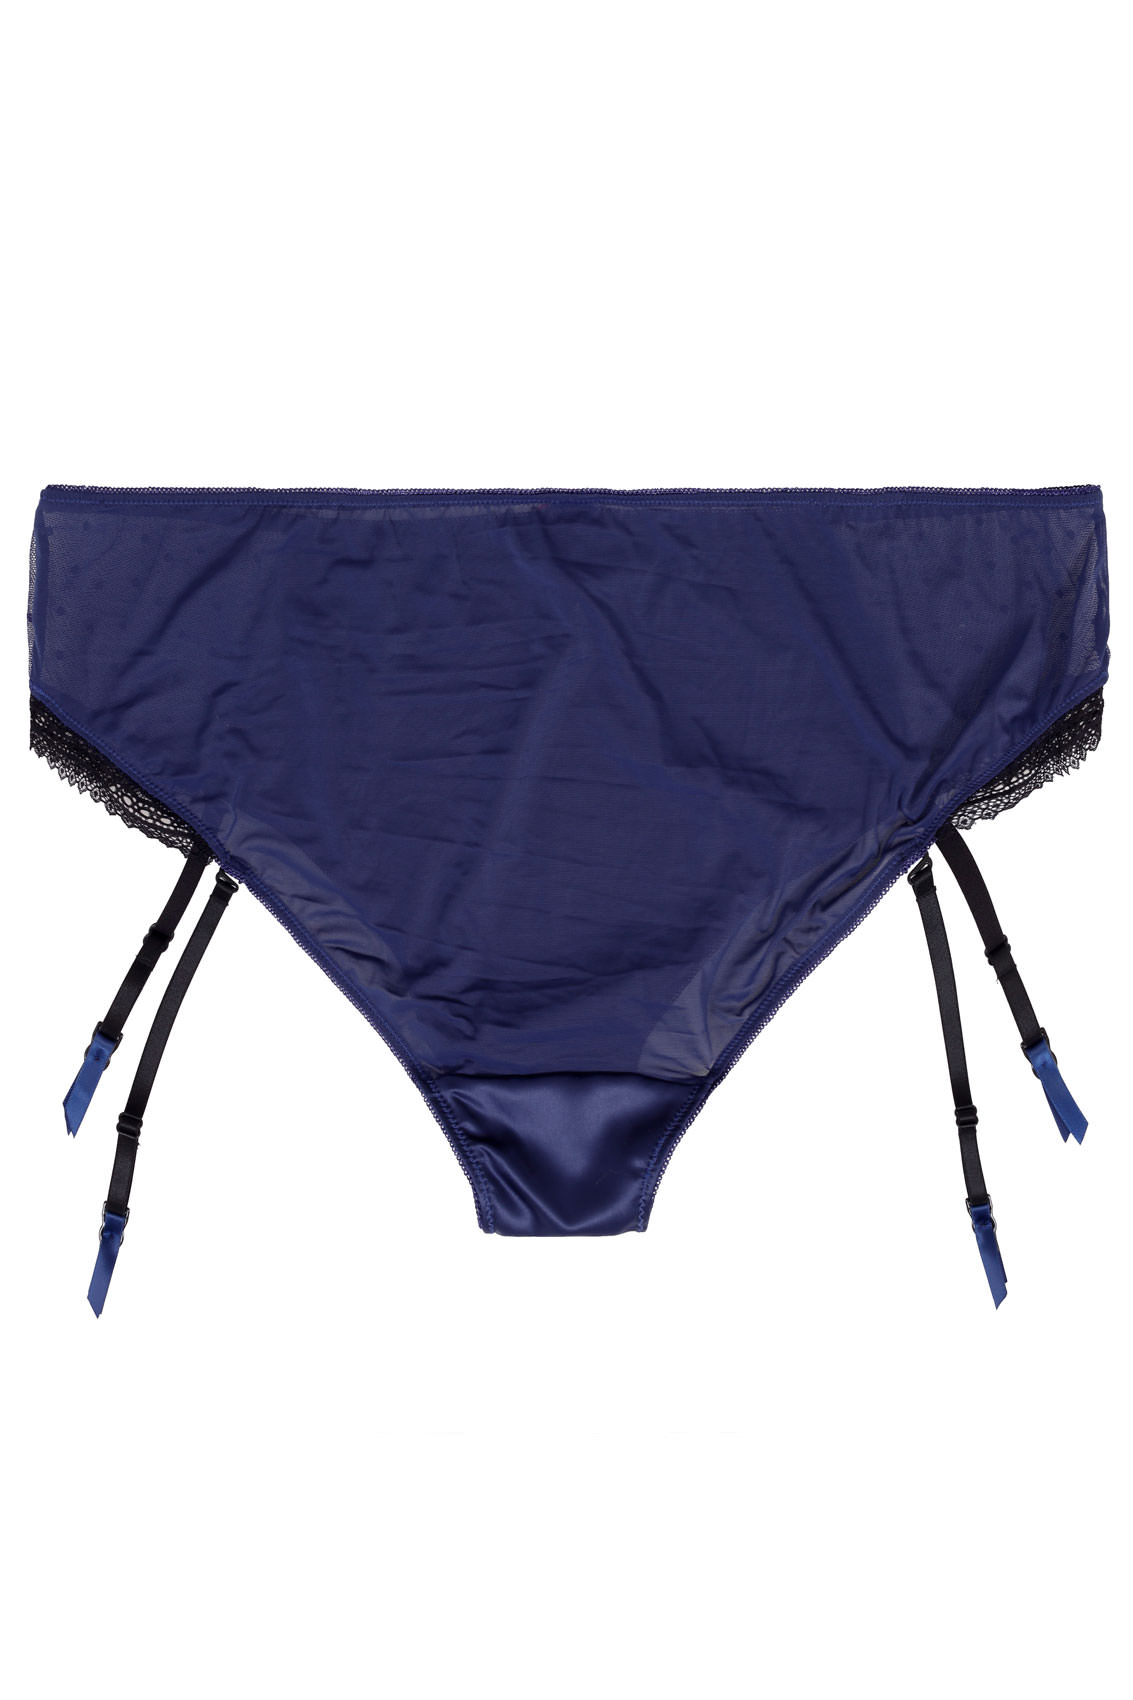 Blue Satin Suspender Brief With Lace Trim Plus Size 14 To 36